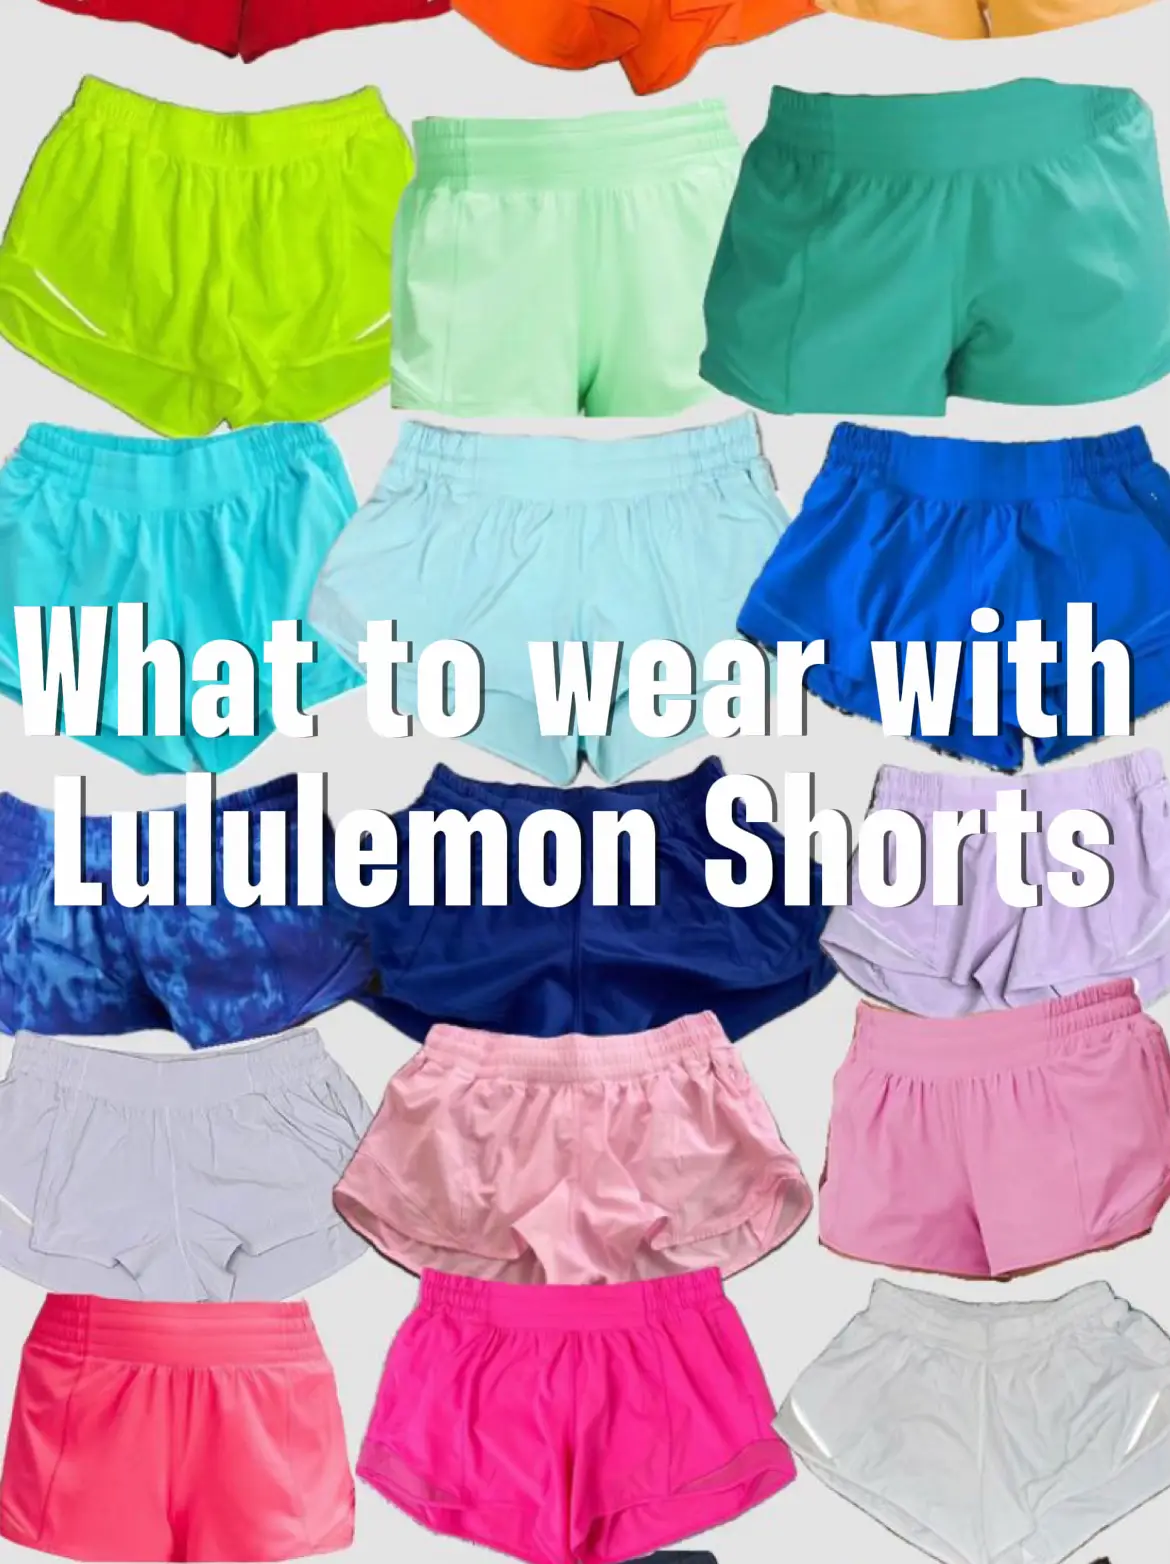 What to wear with bike shorts